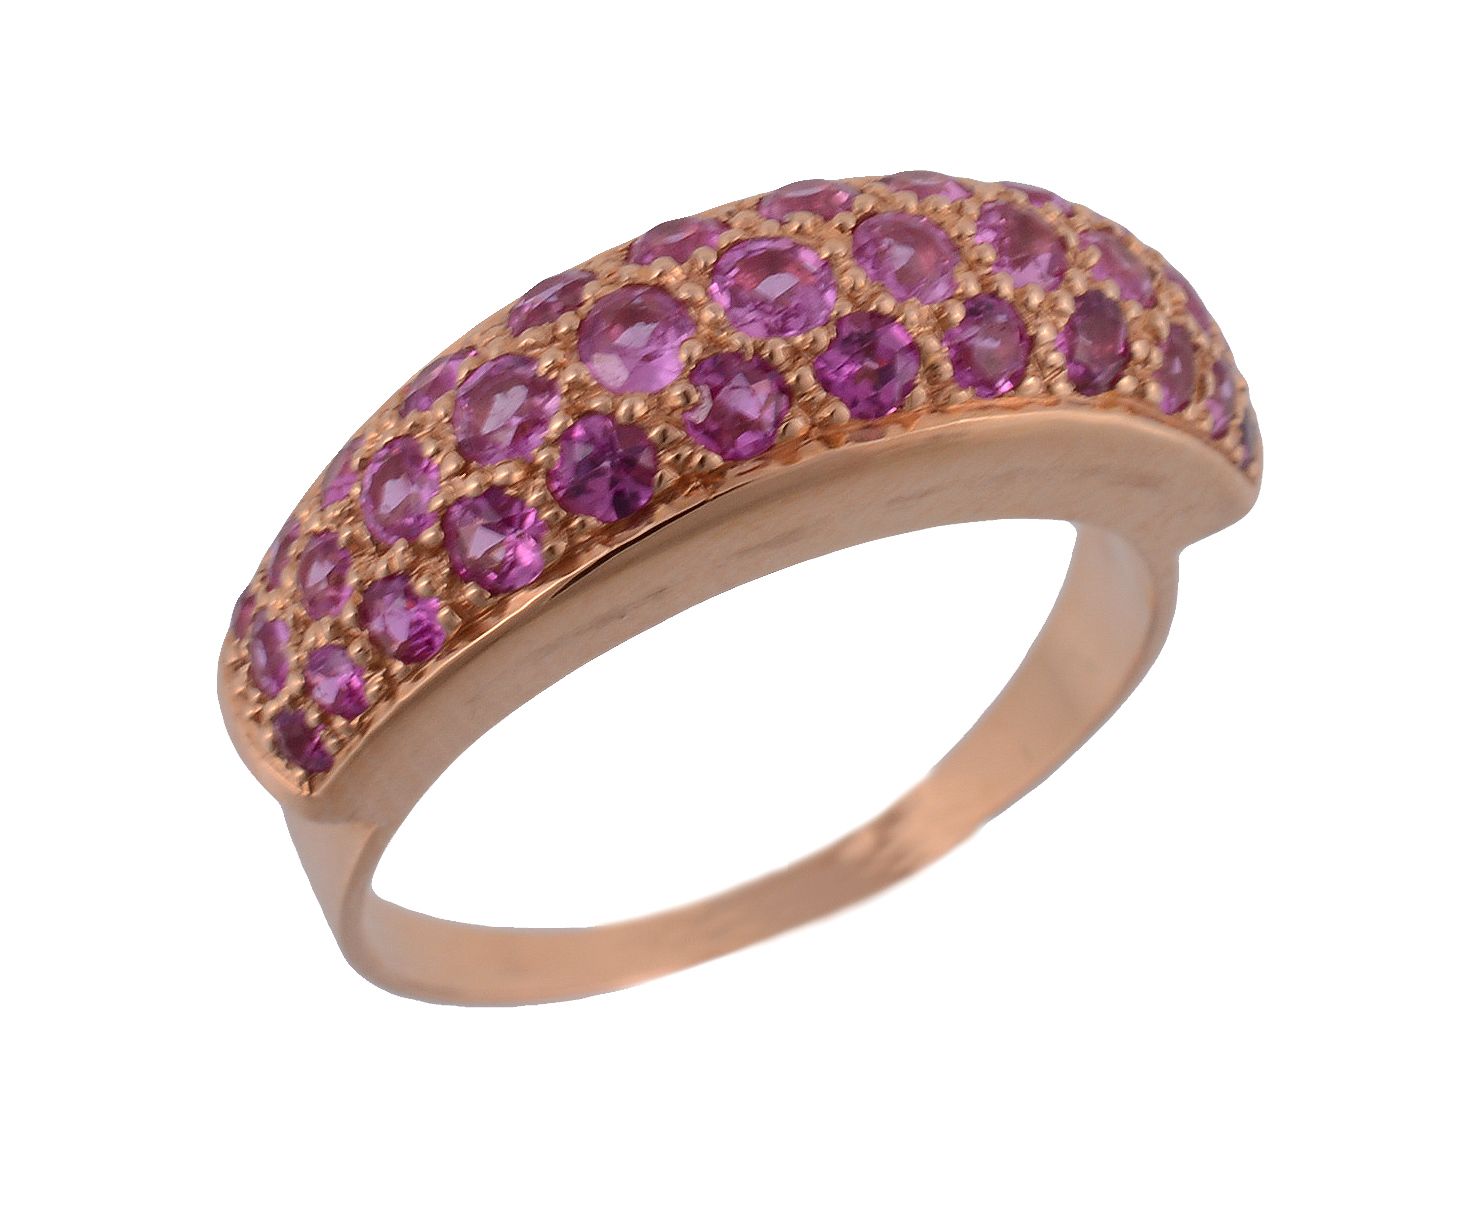 A pink sapphire bombe ring,   composed of three rows of graduated  pink sapphires in a pave